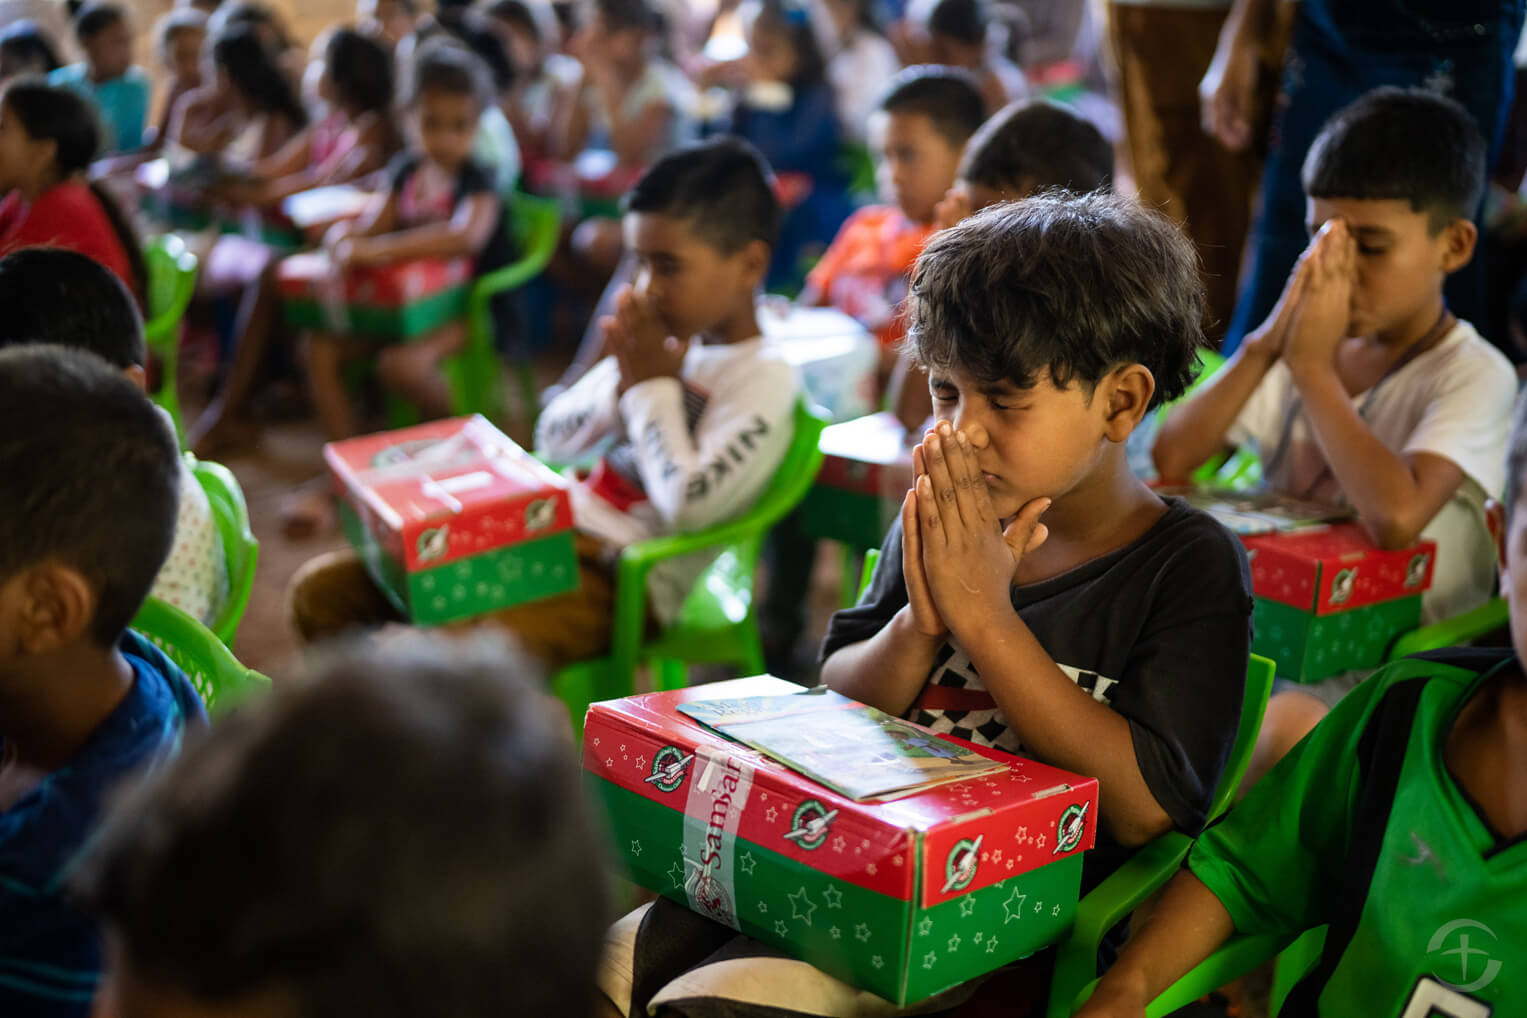 Children pray before opening their Operation Christmas Child shoebox gifts.